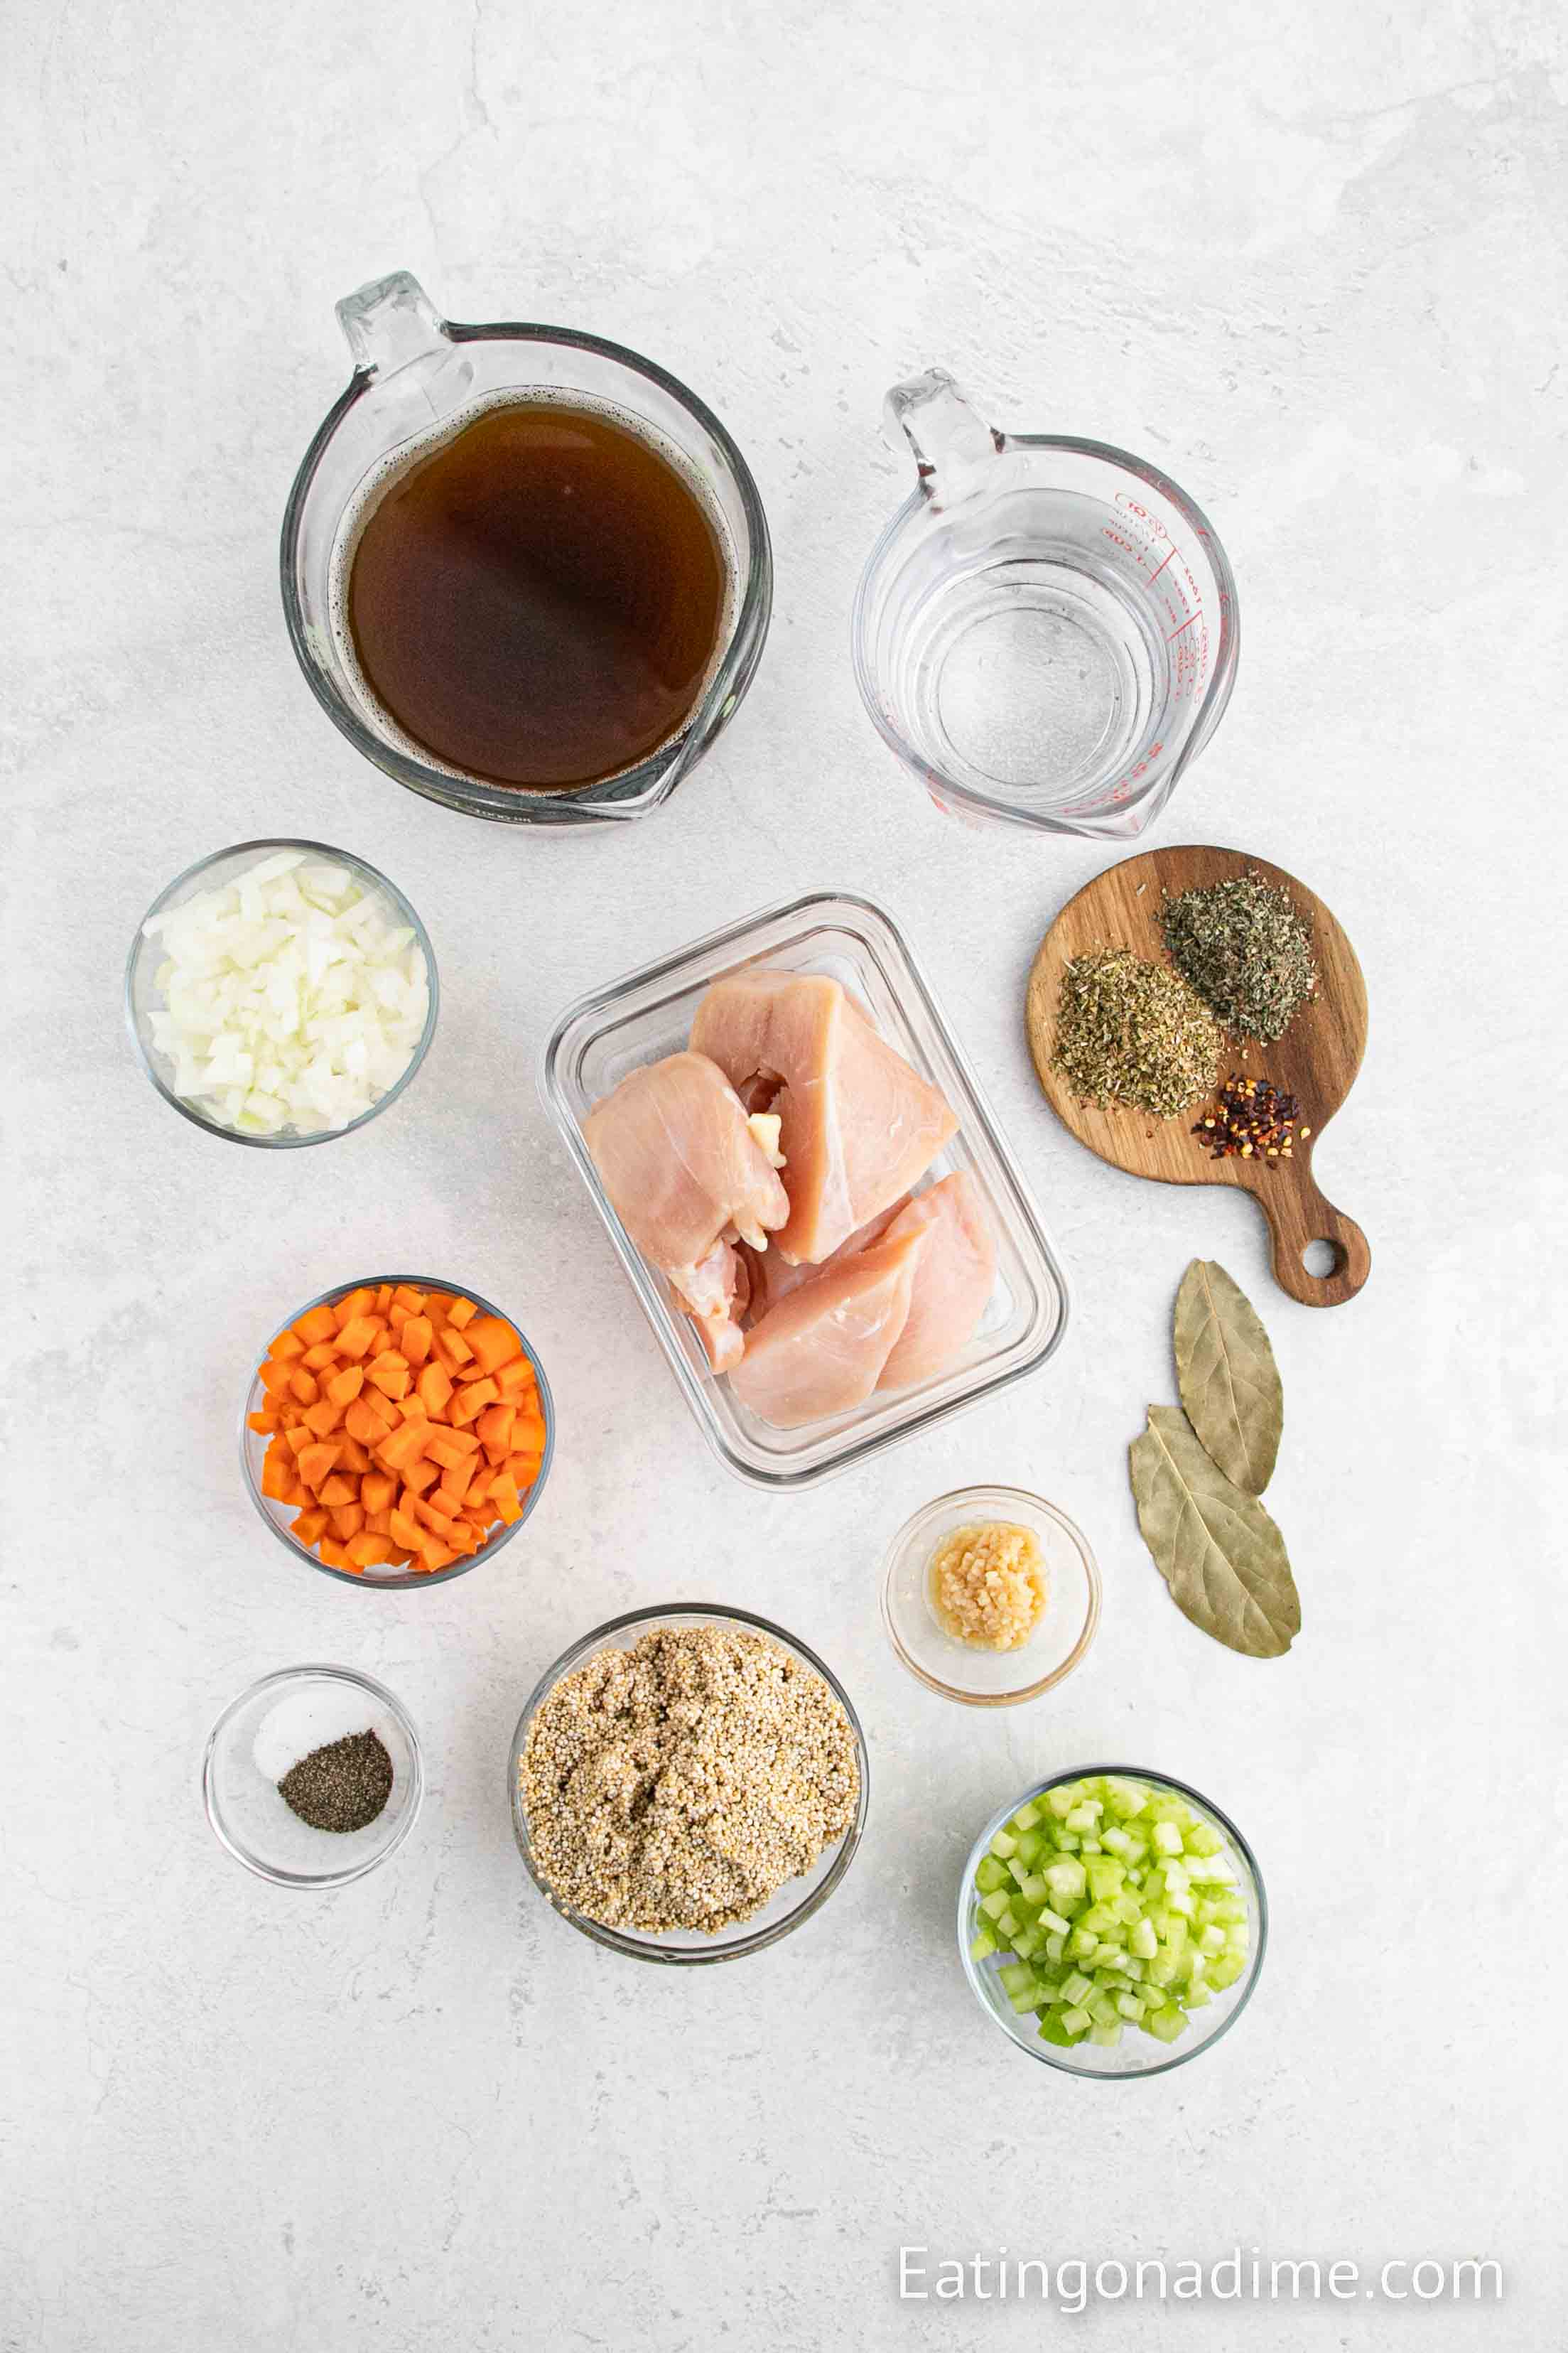 ingredients for chicken quinoa soup - chicken, quinoa, carrots, celery, onion, chicken broth, garlic, bay leaves, oregano, basil, red pepper flakes, salt, pepper